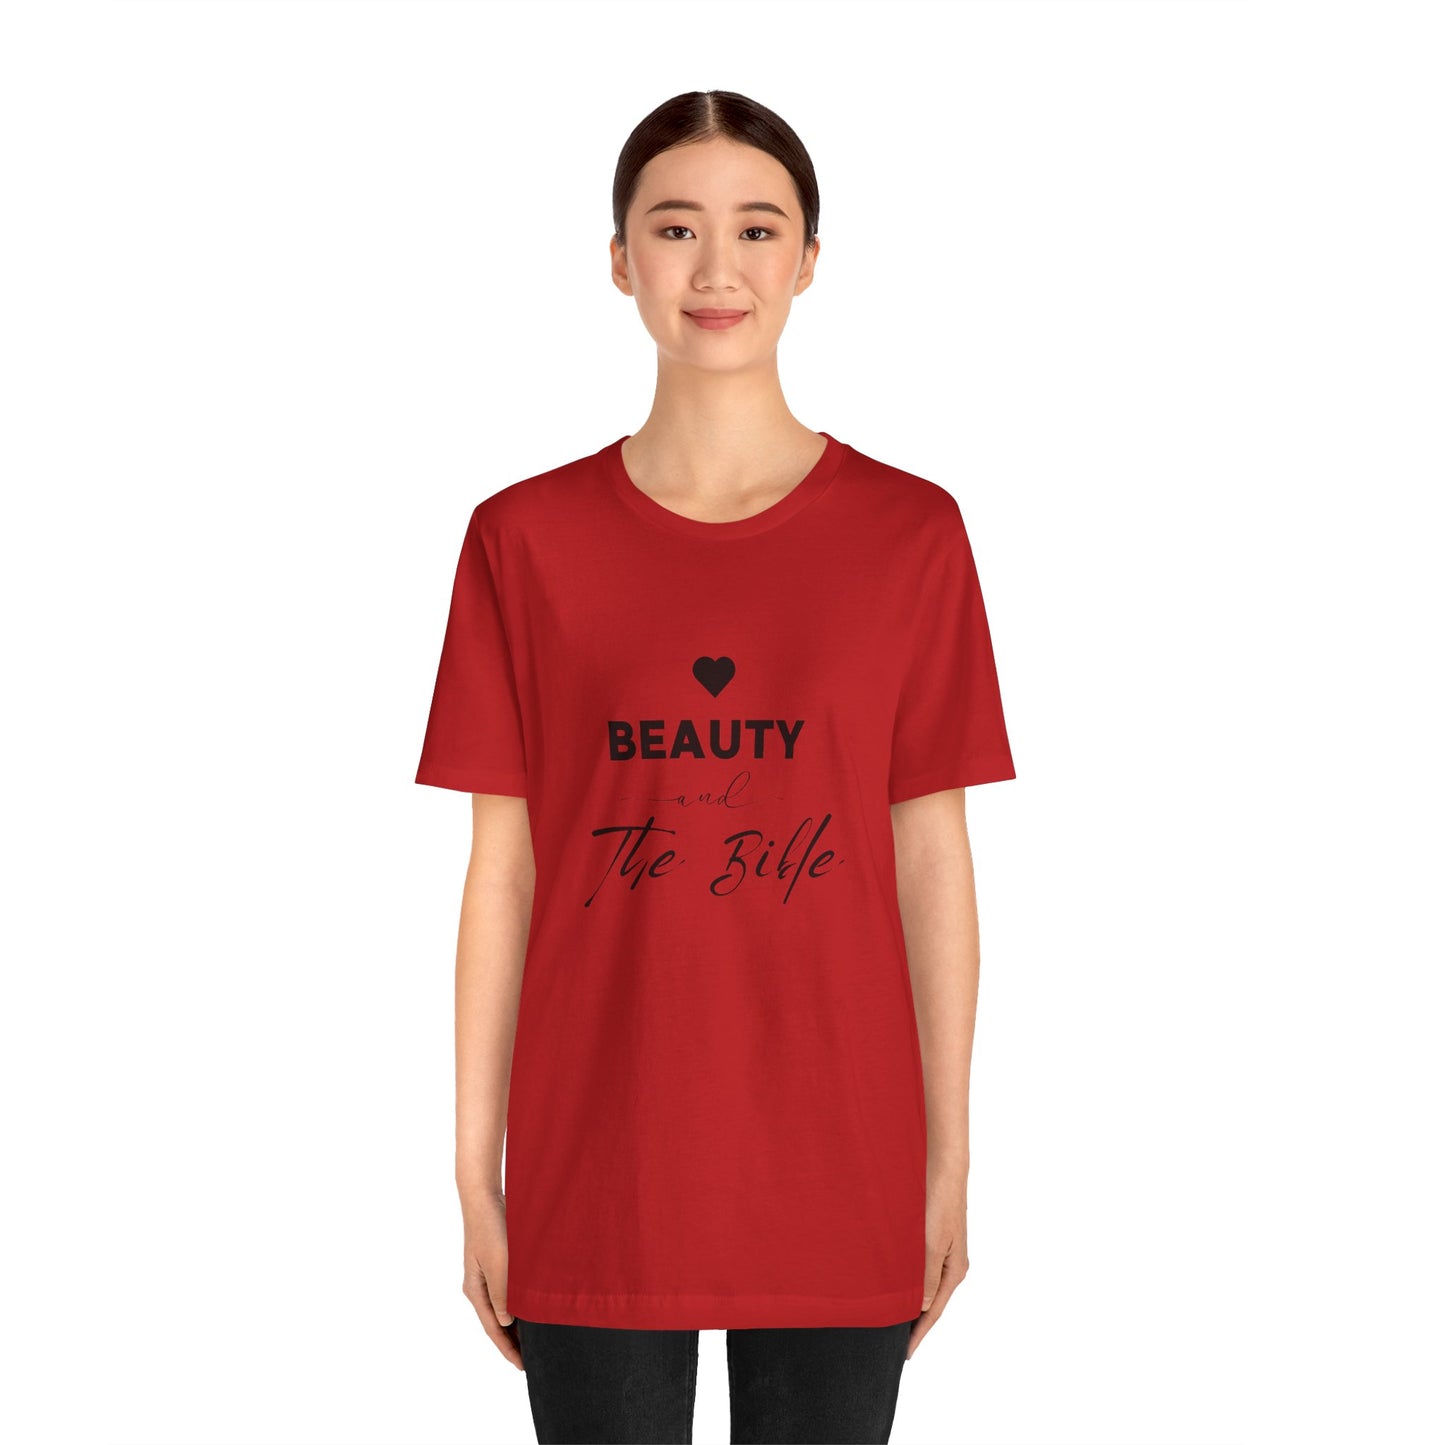 Beauty and the Bible Unisex Jersey Short Sleeve Tee